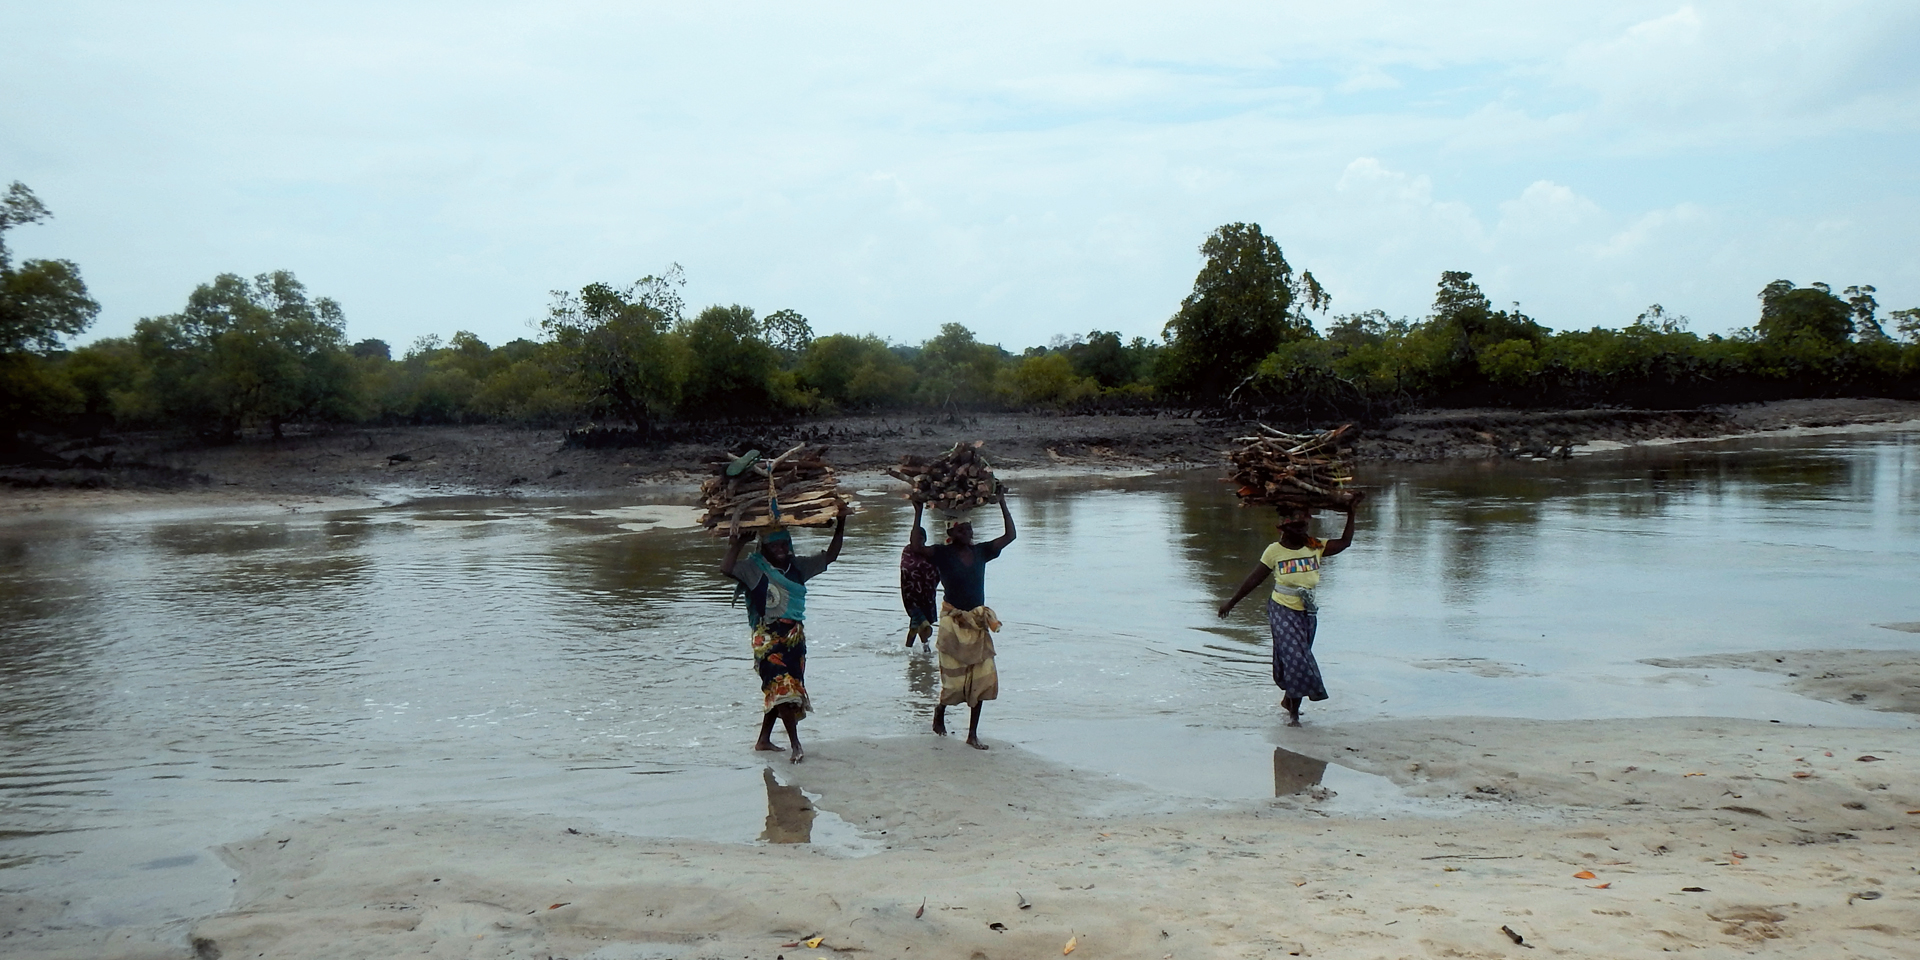 Image of women carrying stacks of wood on their heads as they cross a shallow river.